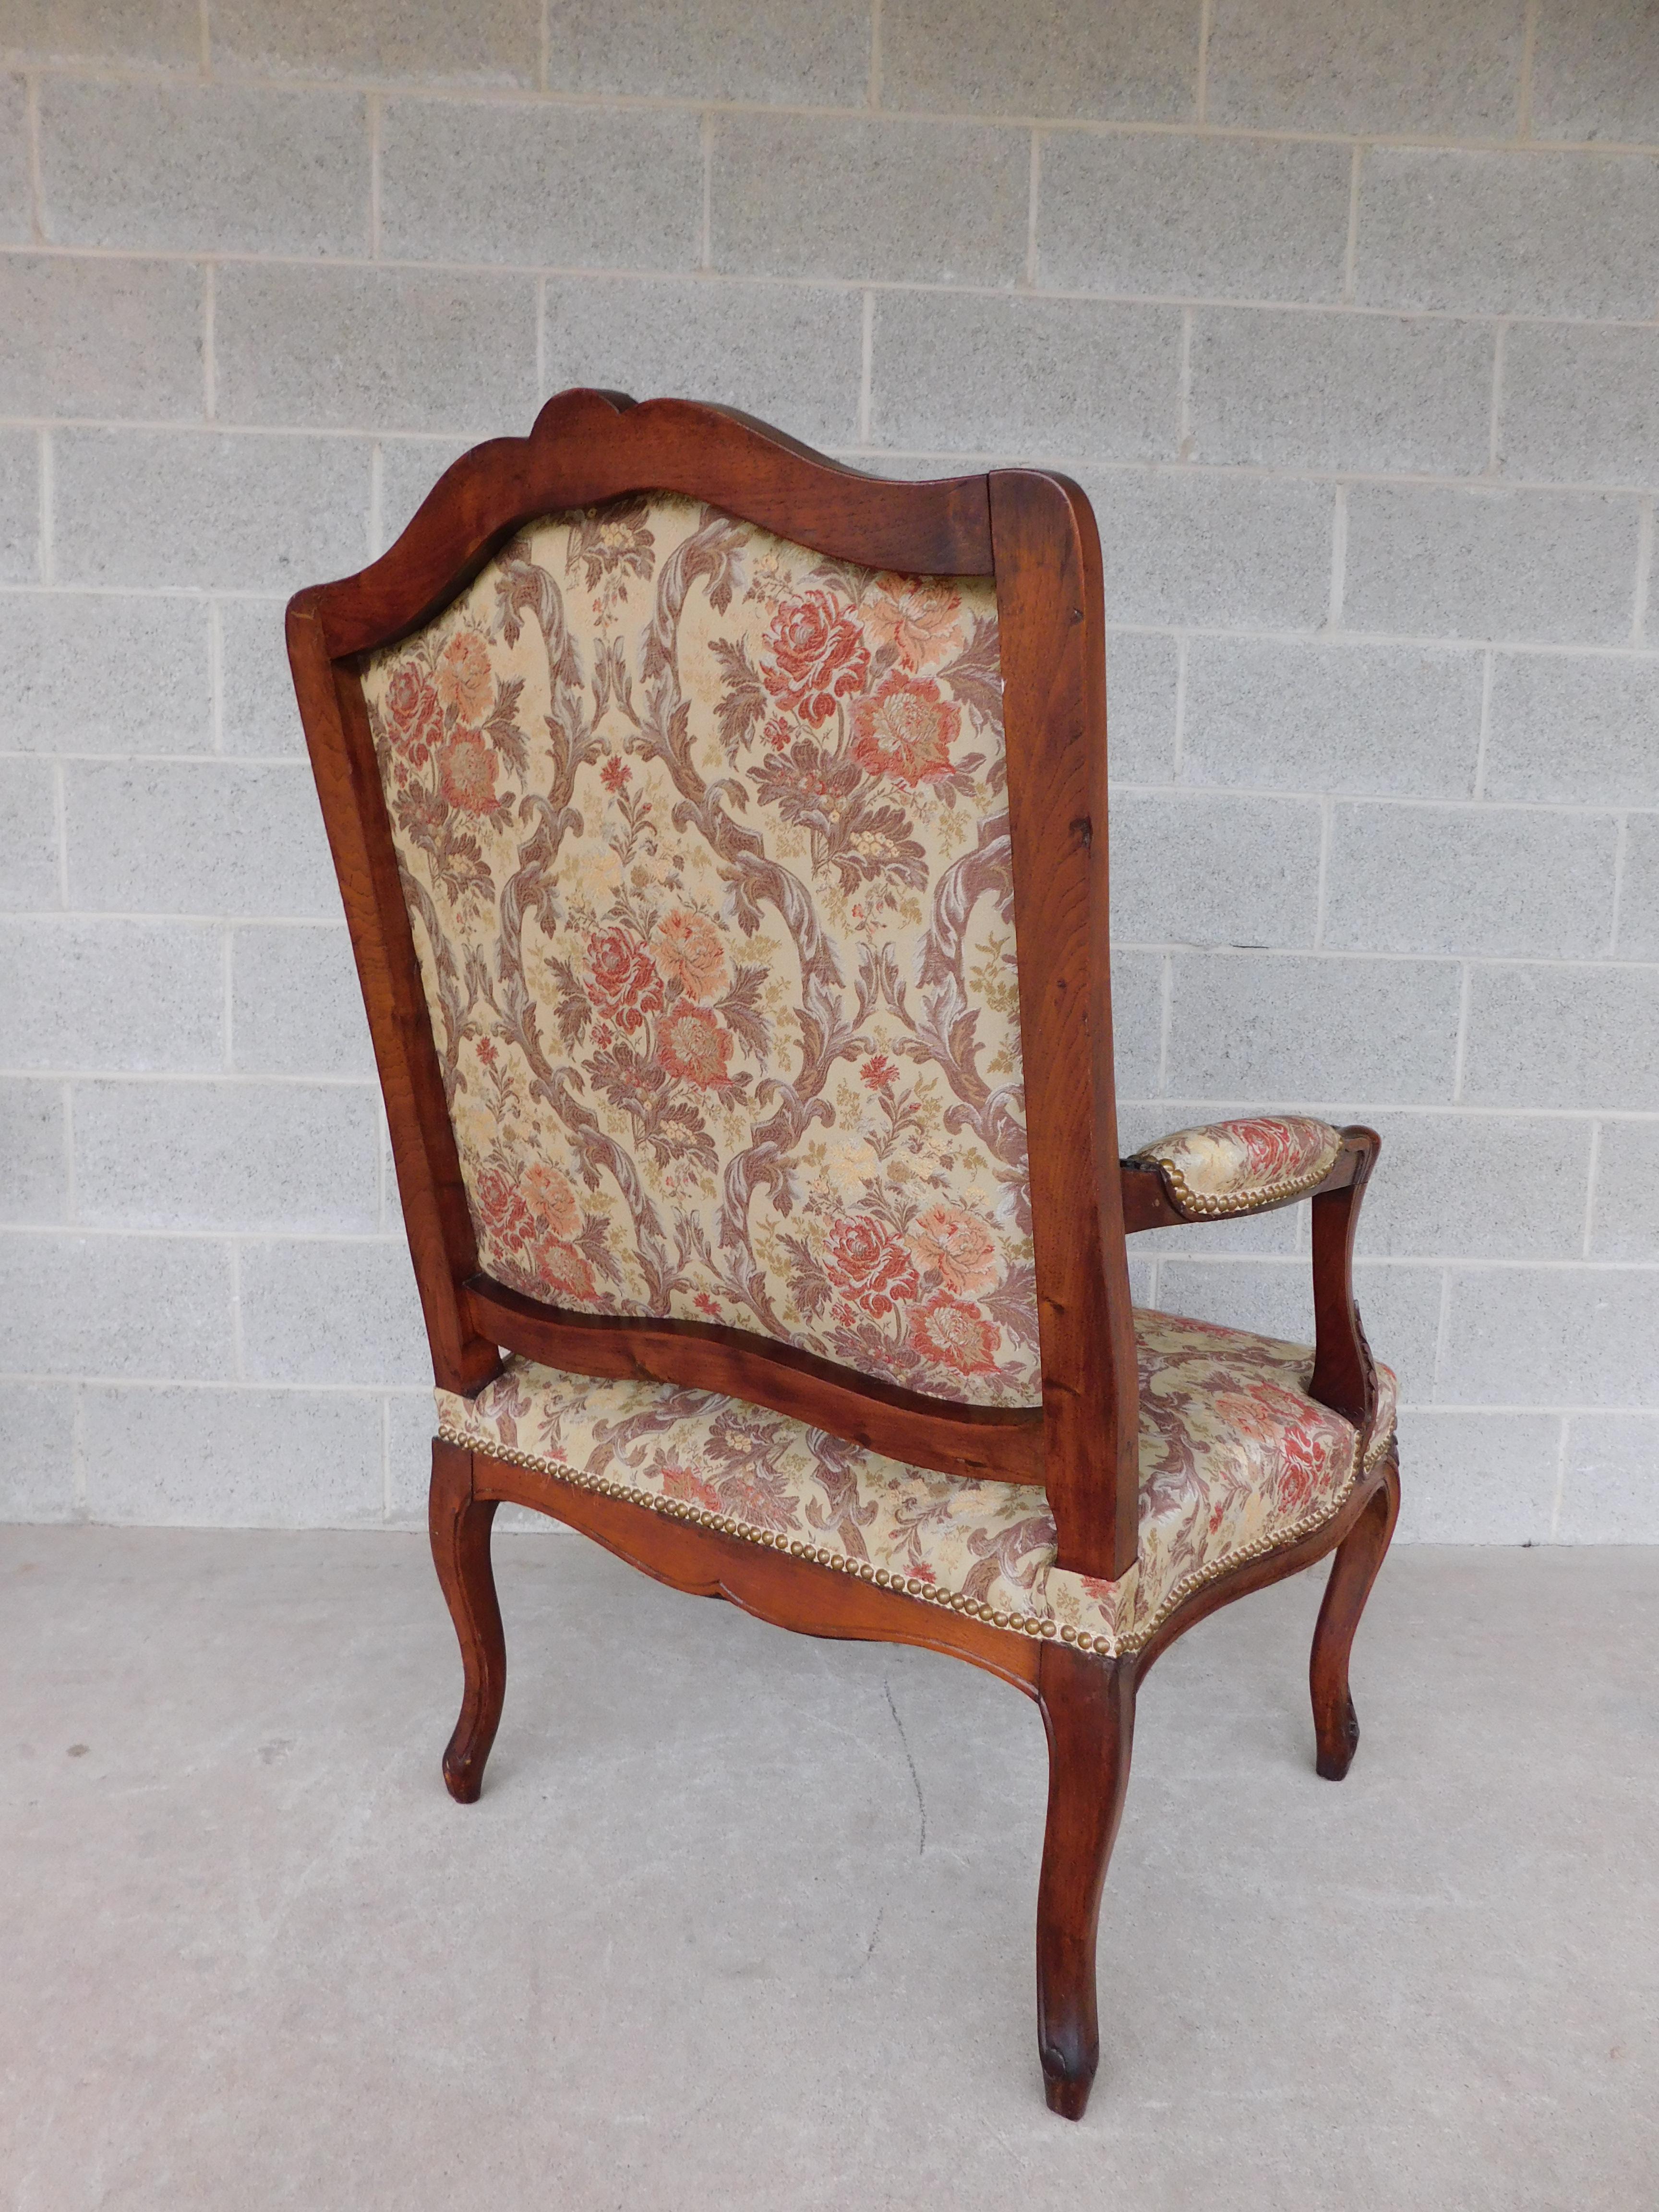 Vintage French Louis XV Style Fauteuil Chairs  - a Pair For Sale 4